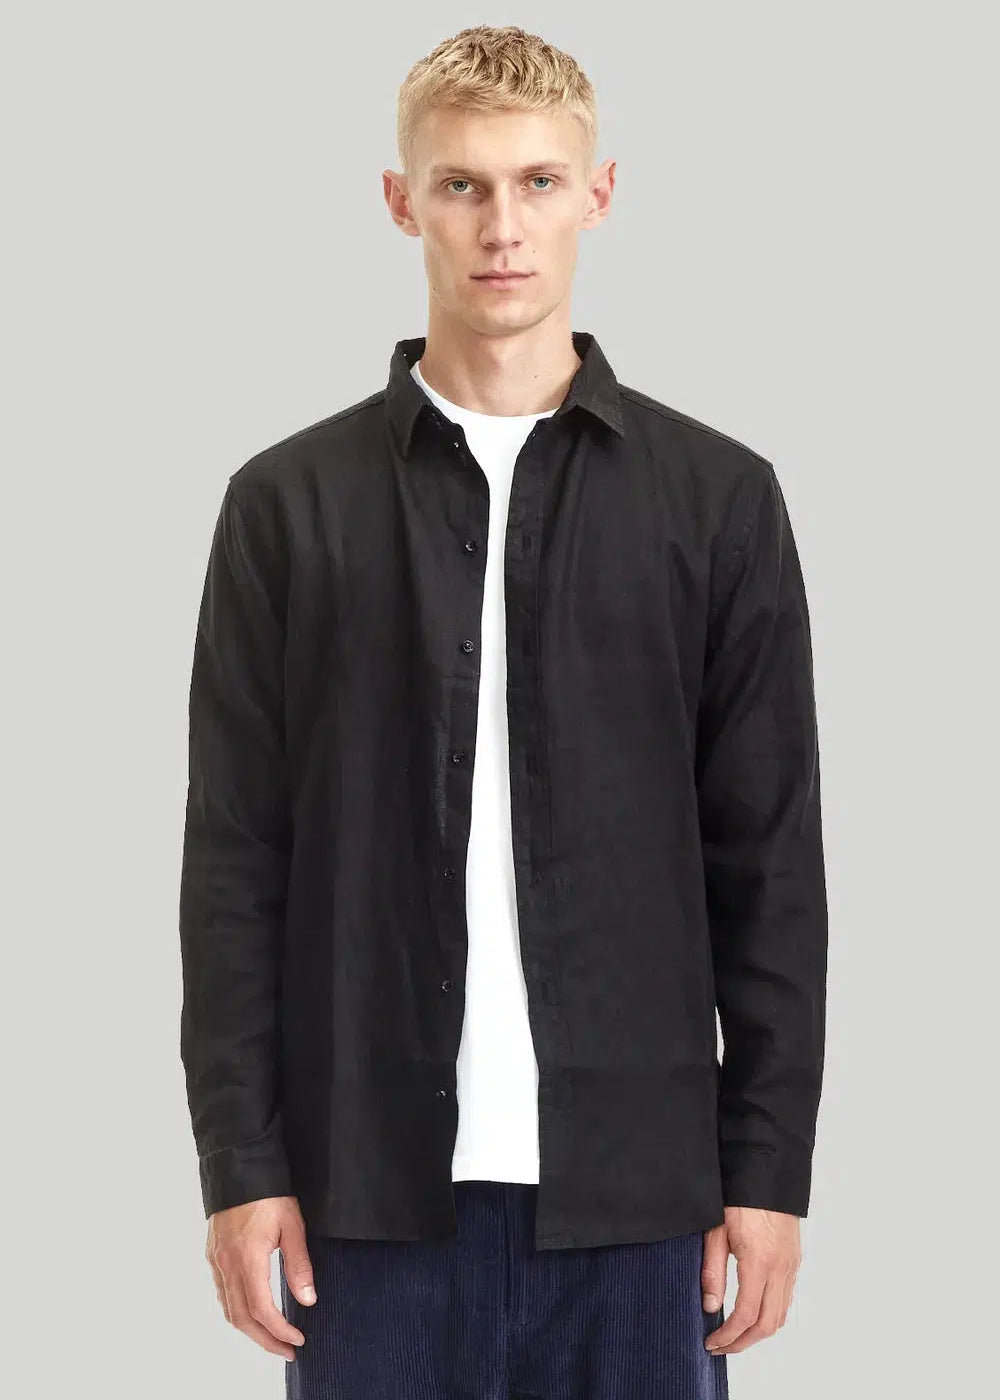 MENS CLASSIC LINEN SHIRT / BLACK | COMMONERS | Mad About The Boy